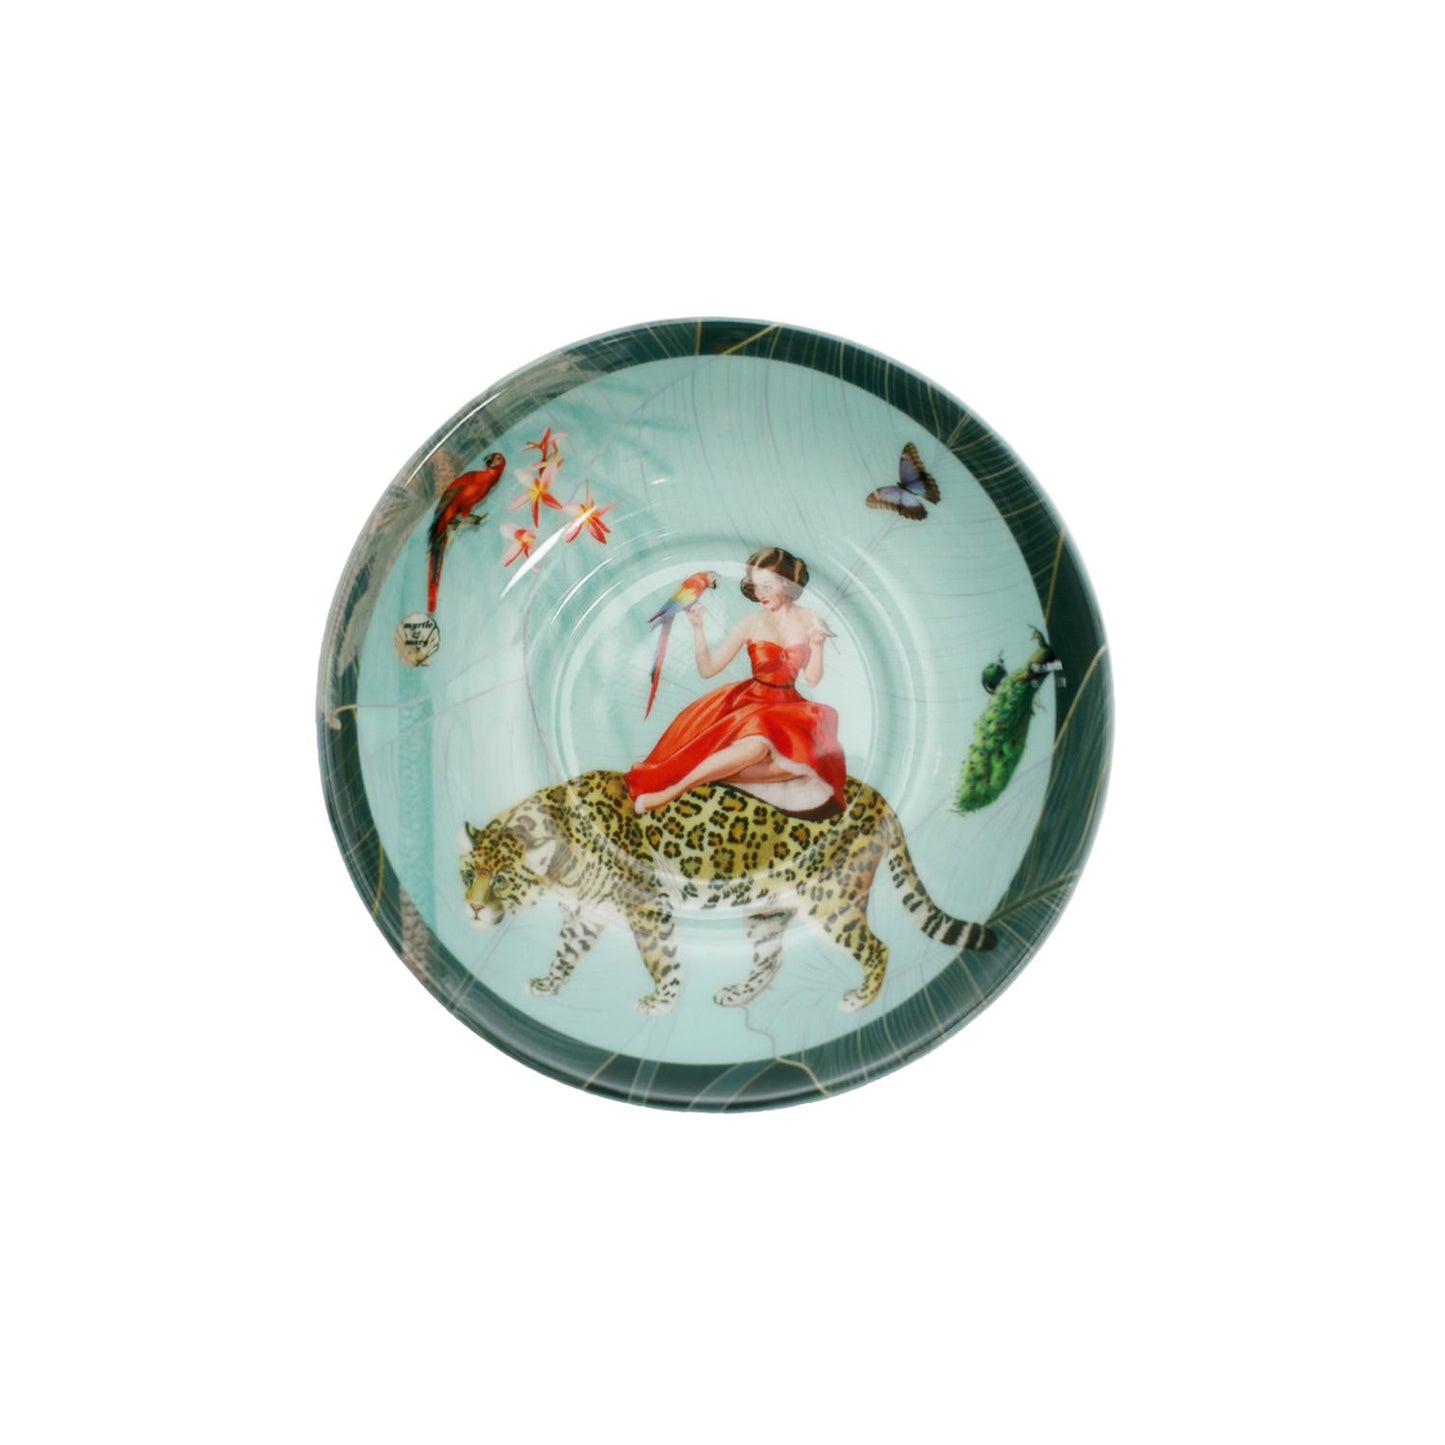 Luxury bone china saucer in a maximalist turquoise design called - Mary Turquoise